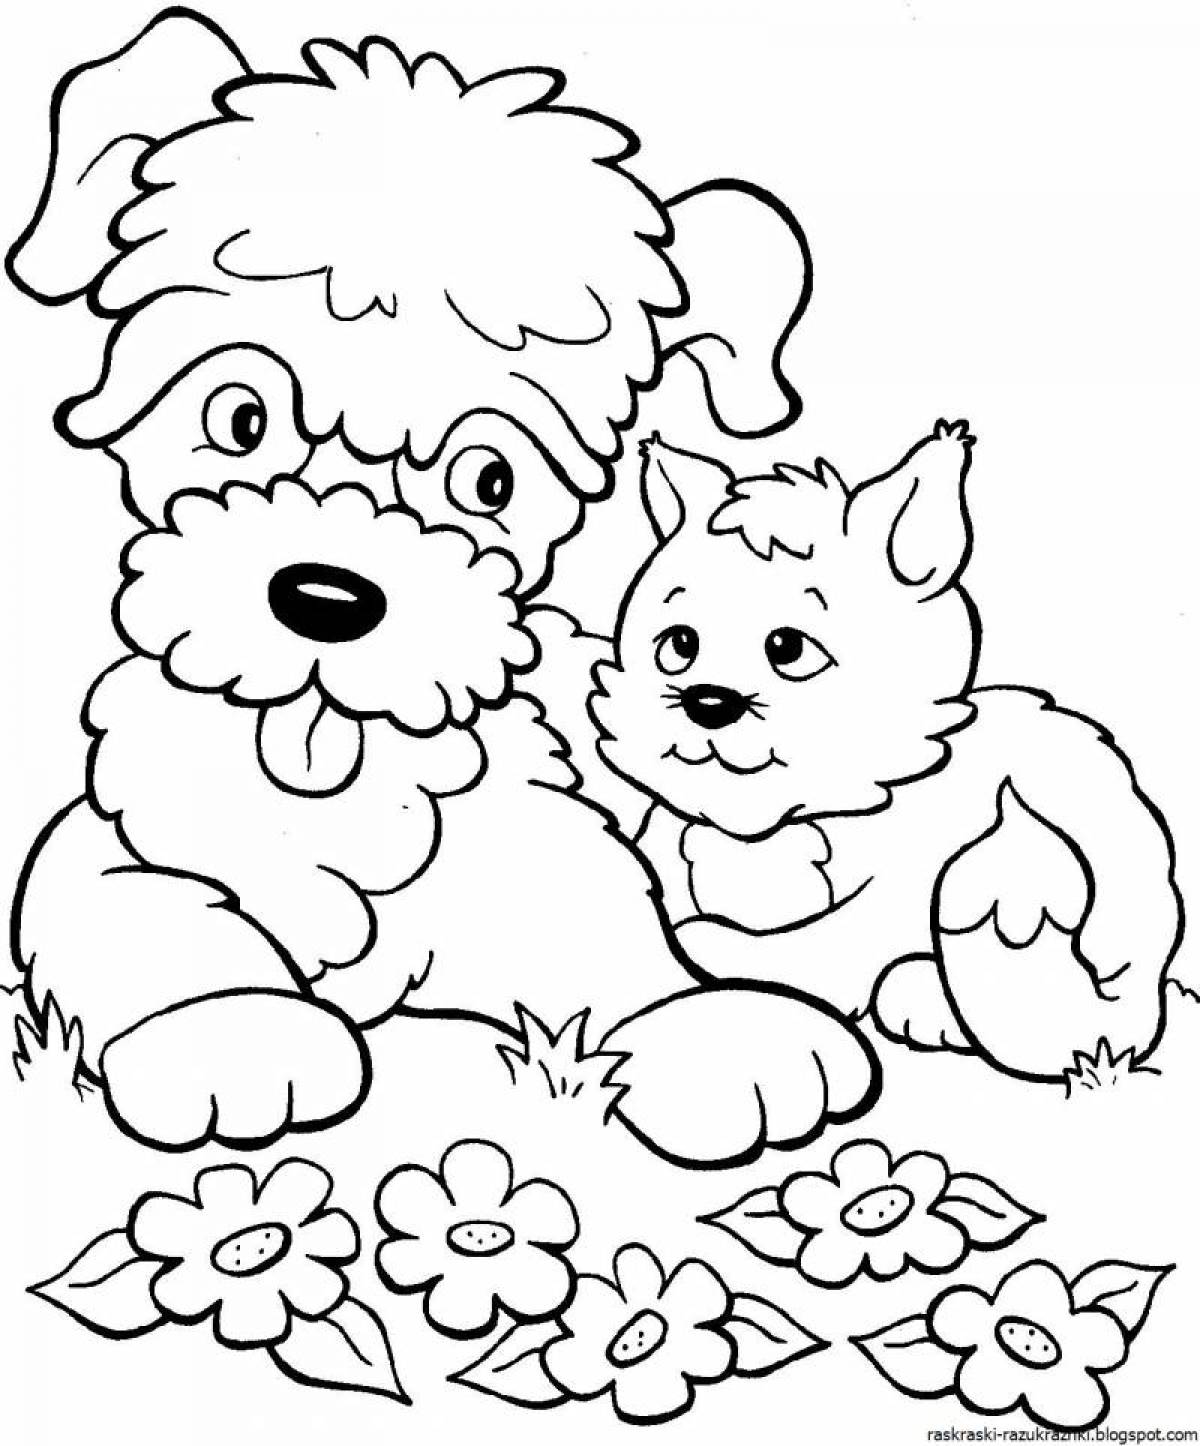 Coloring pages with big heart doggie kitties